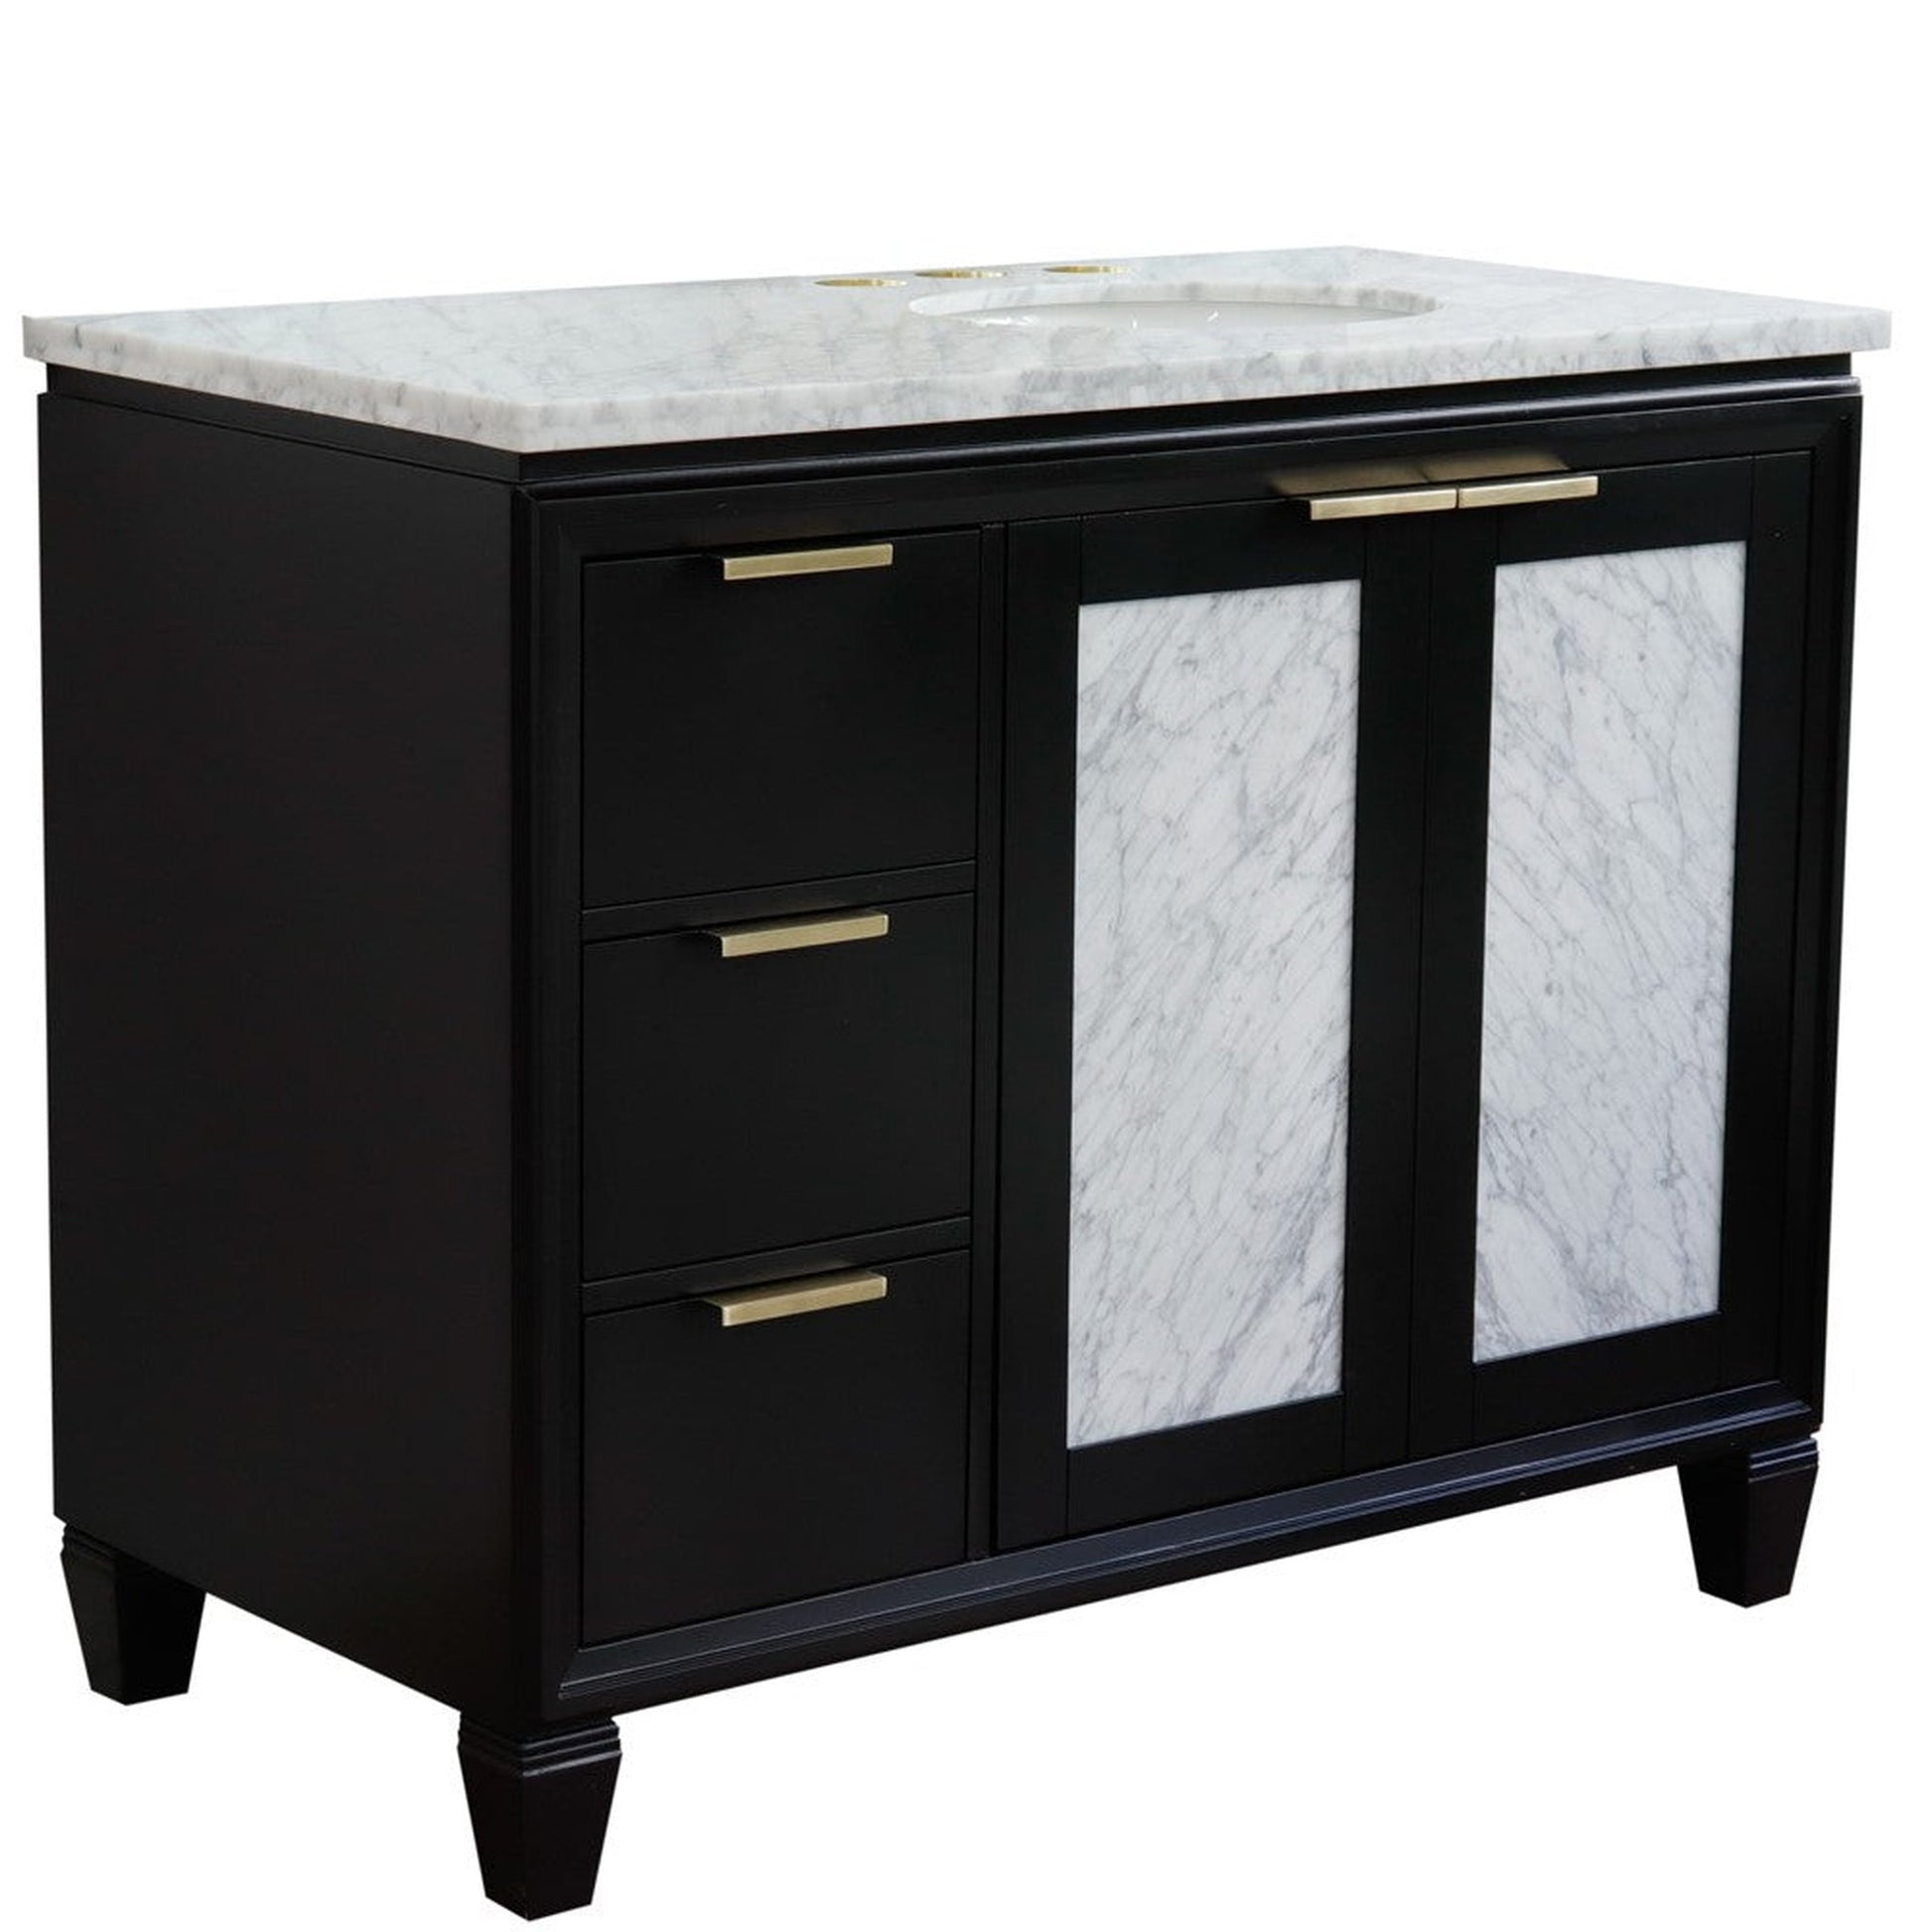 Bellaterra Home Trento 43" 2-Door 3-Drawer Black Freestanding Vanity Set With Ceramic Right Undermount Oval Sink and White Carrara Marble Top, and Right Door Cabinet